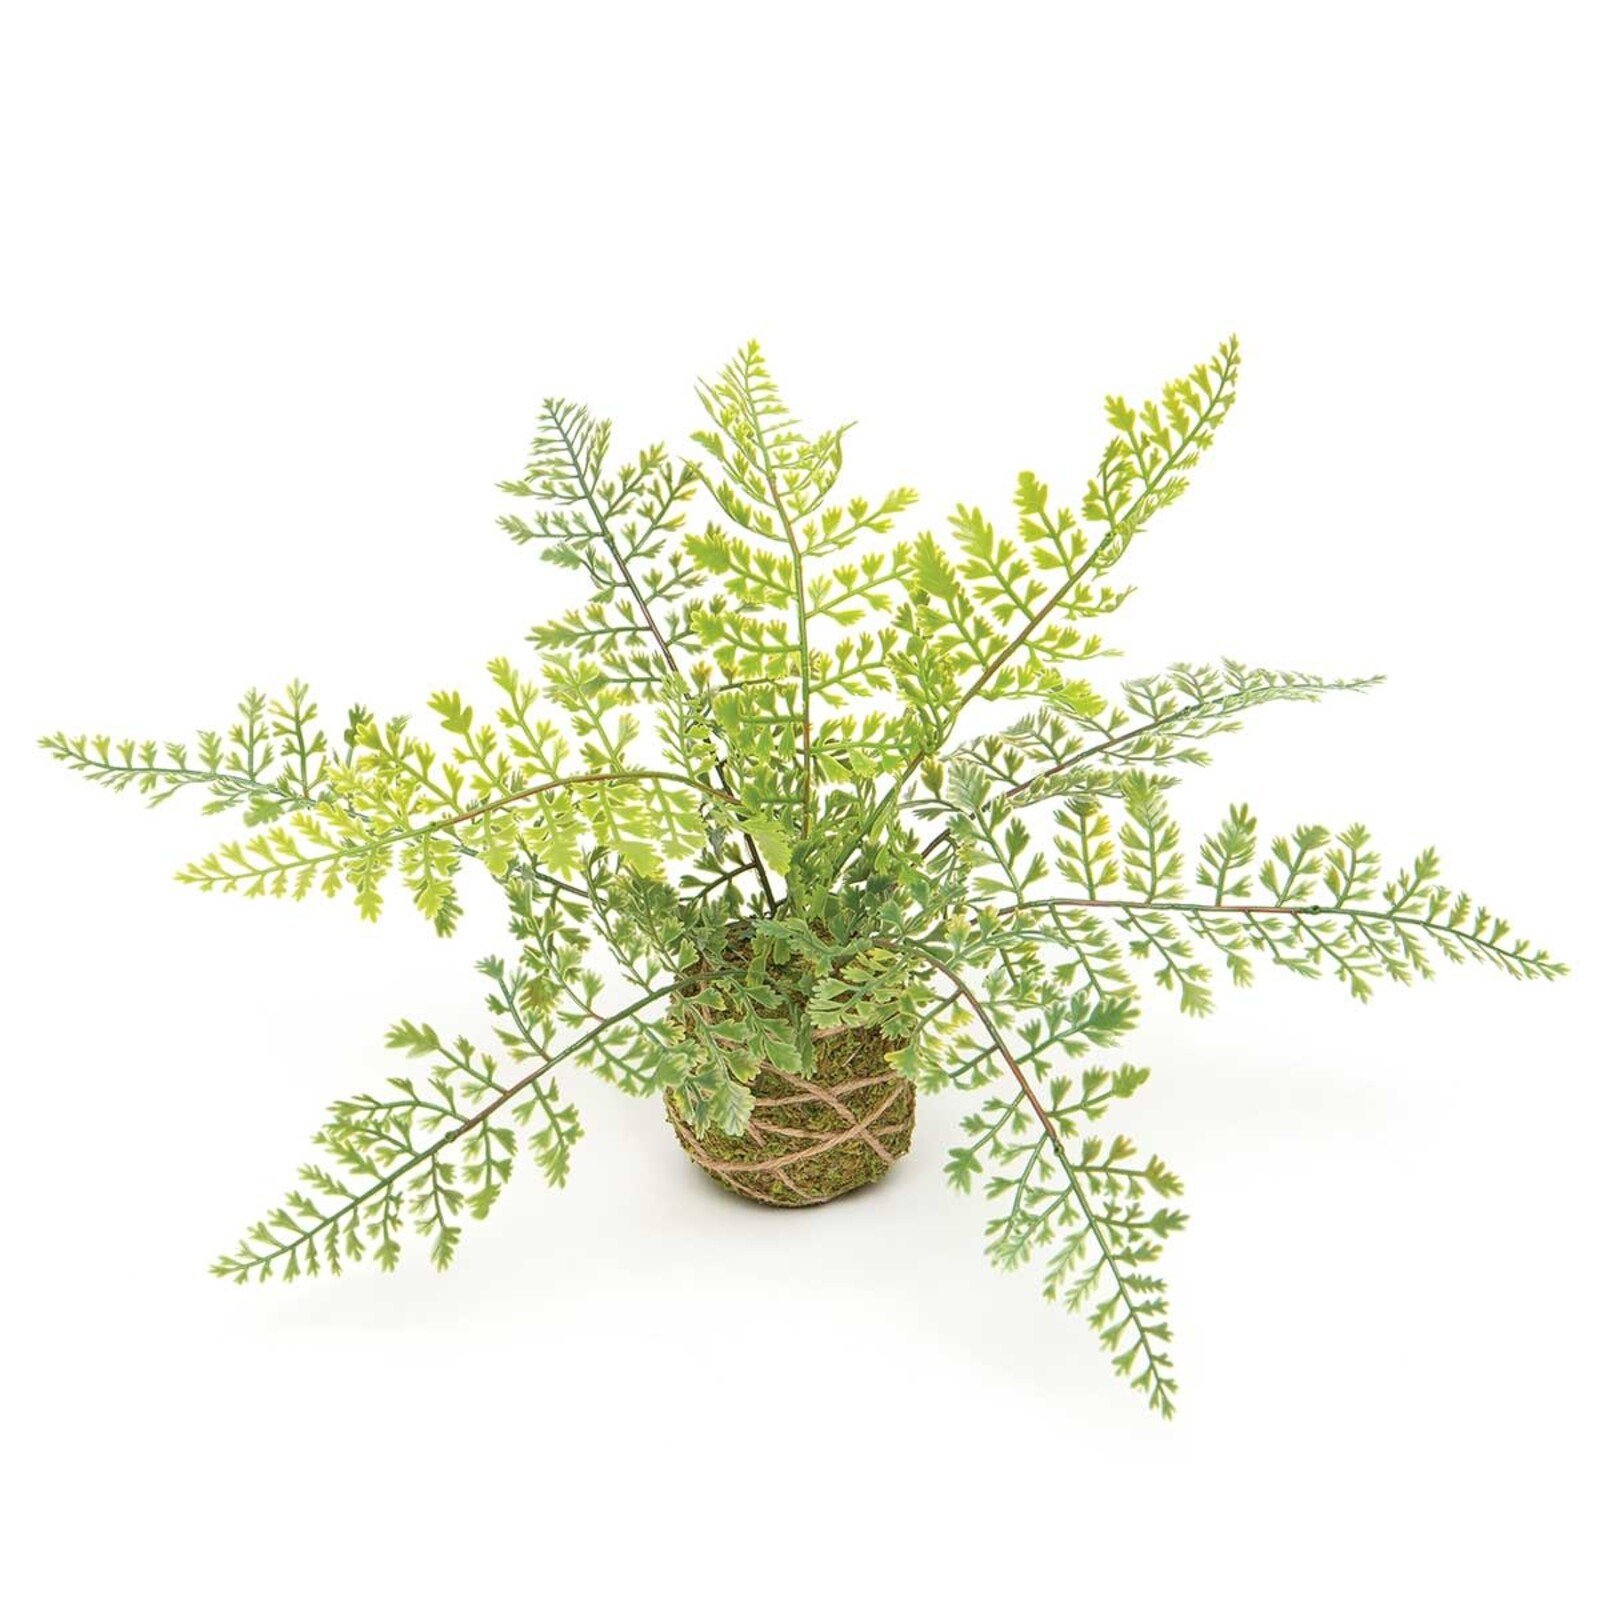 Meravic Maiden Hair Fern on Moss Ball Wrapped with TwineE2065 loading=